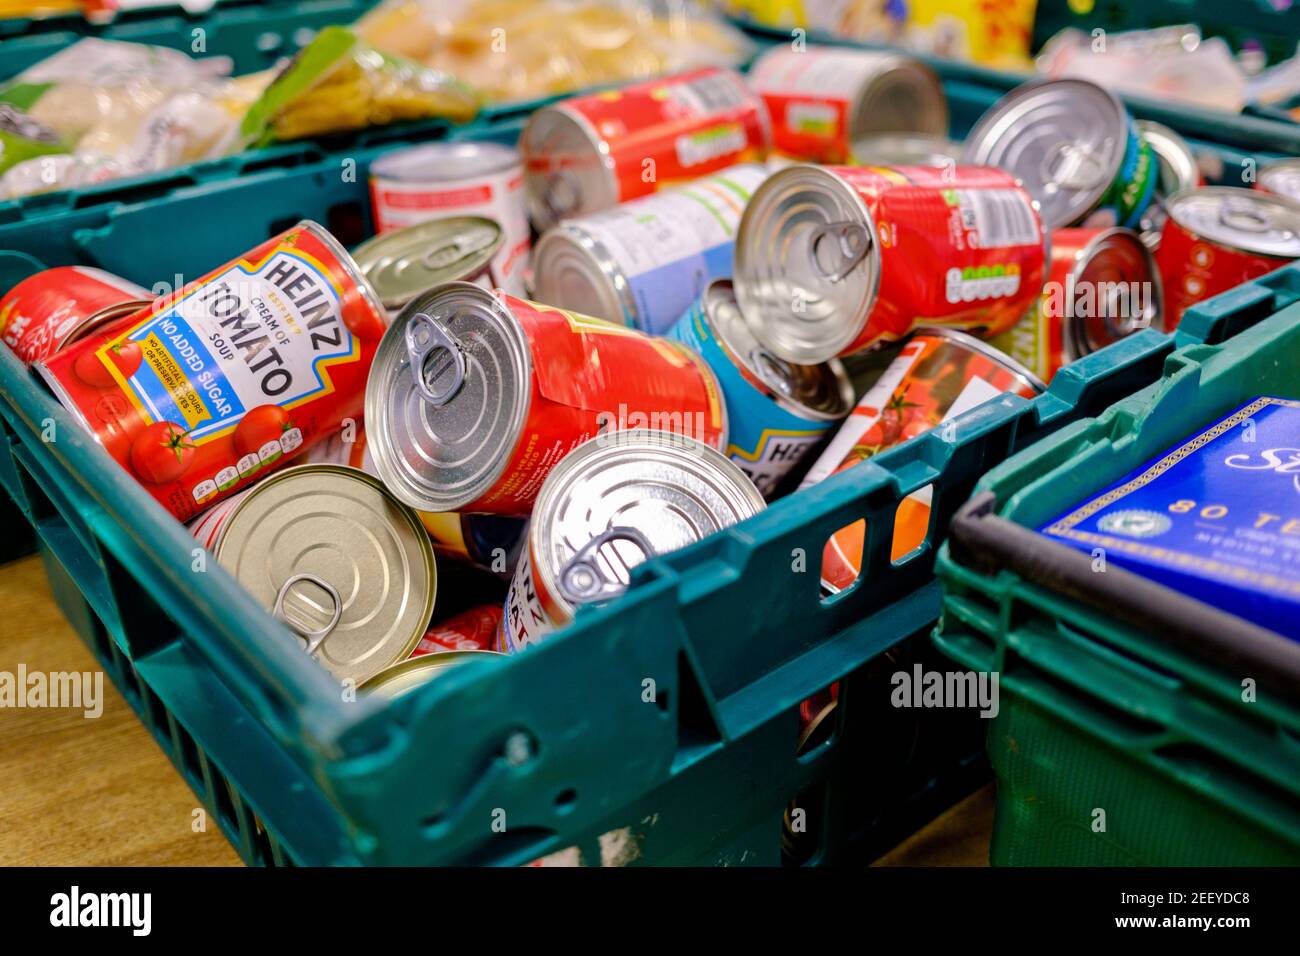 Tinned food, including Heinz Tomato soup, donated to a Trussell Trust Foodbank. Food donations for people experiencing food poverty. London, UK. Stock Photo